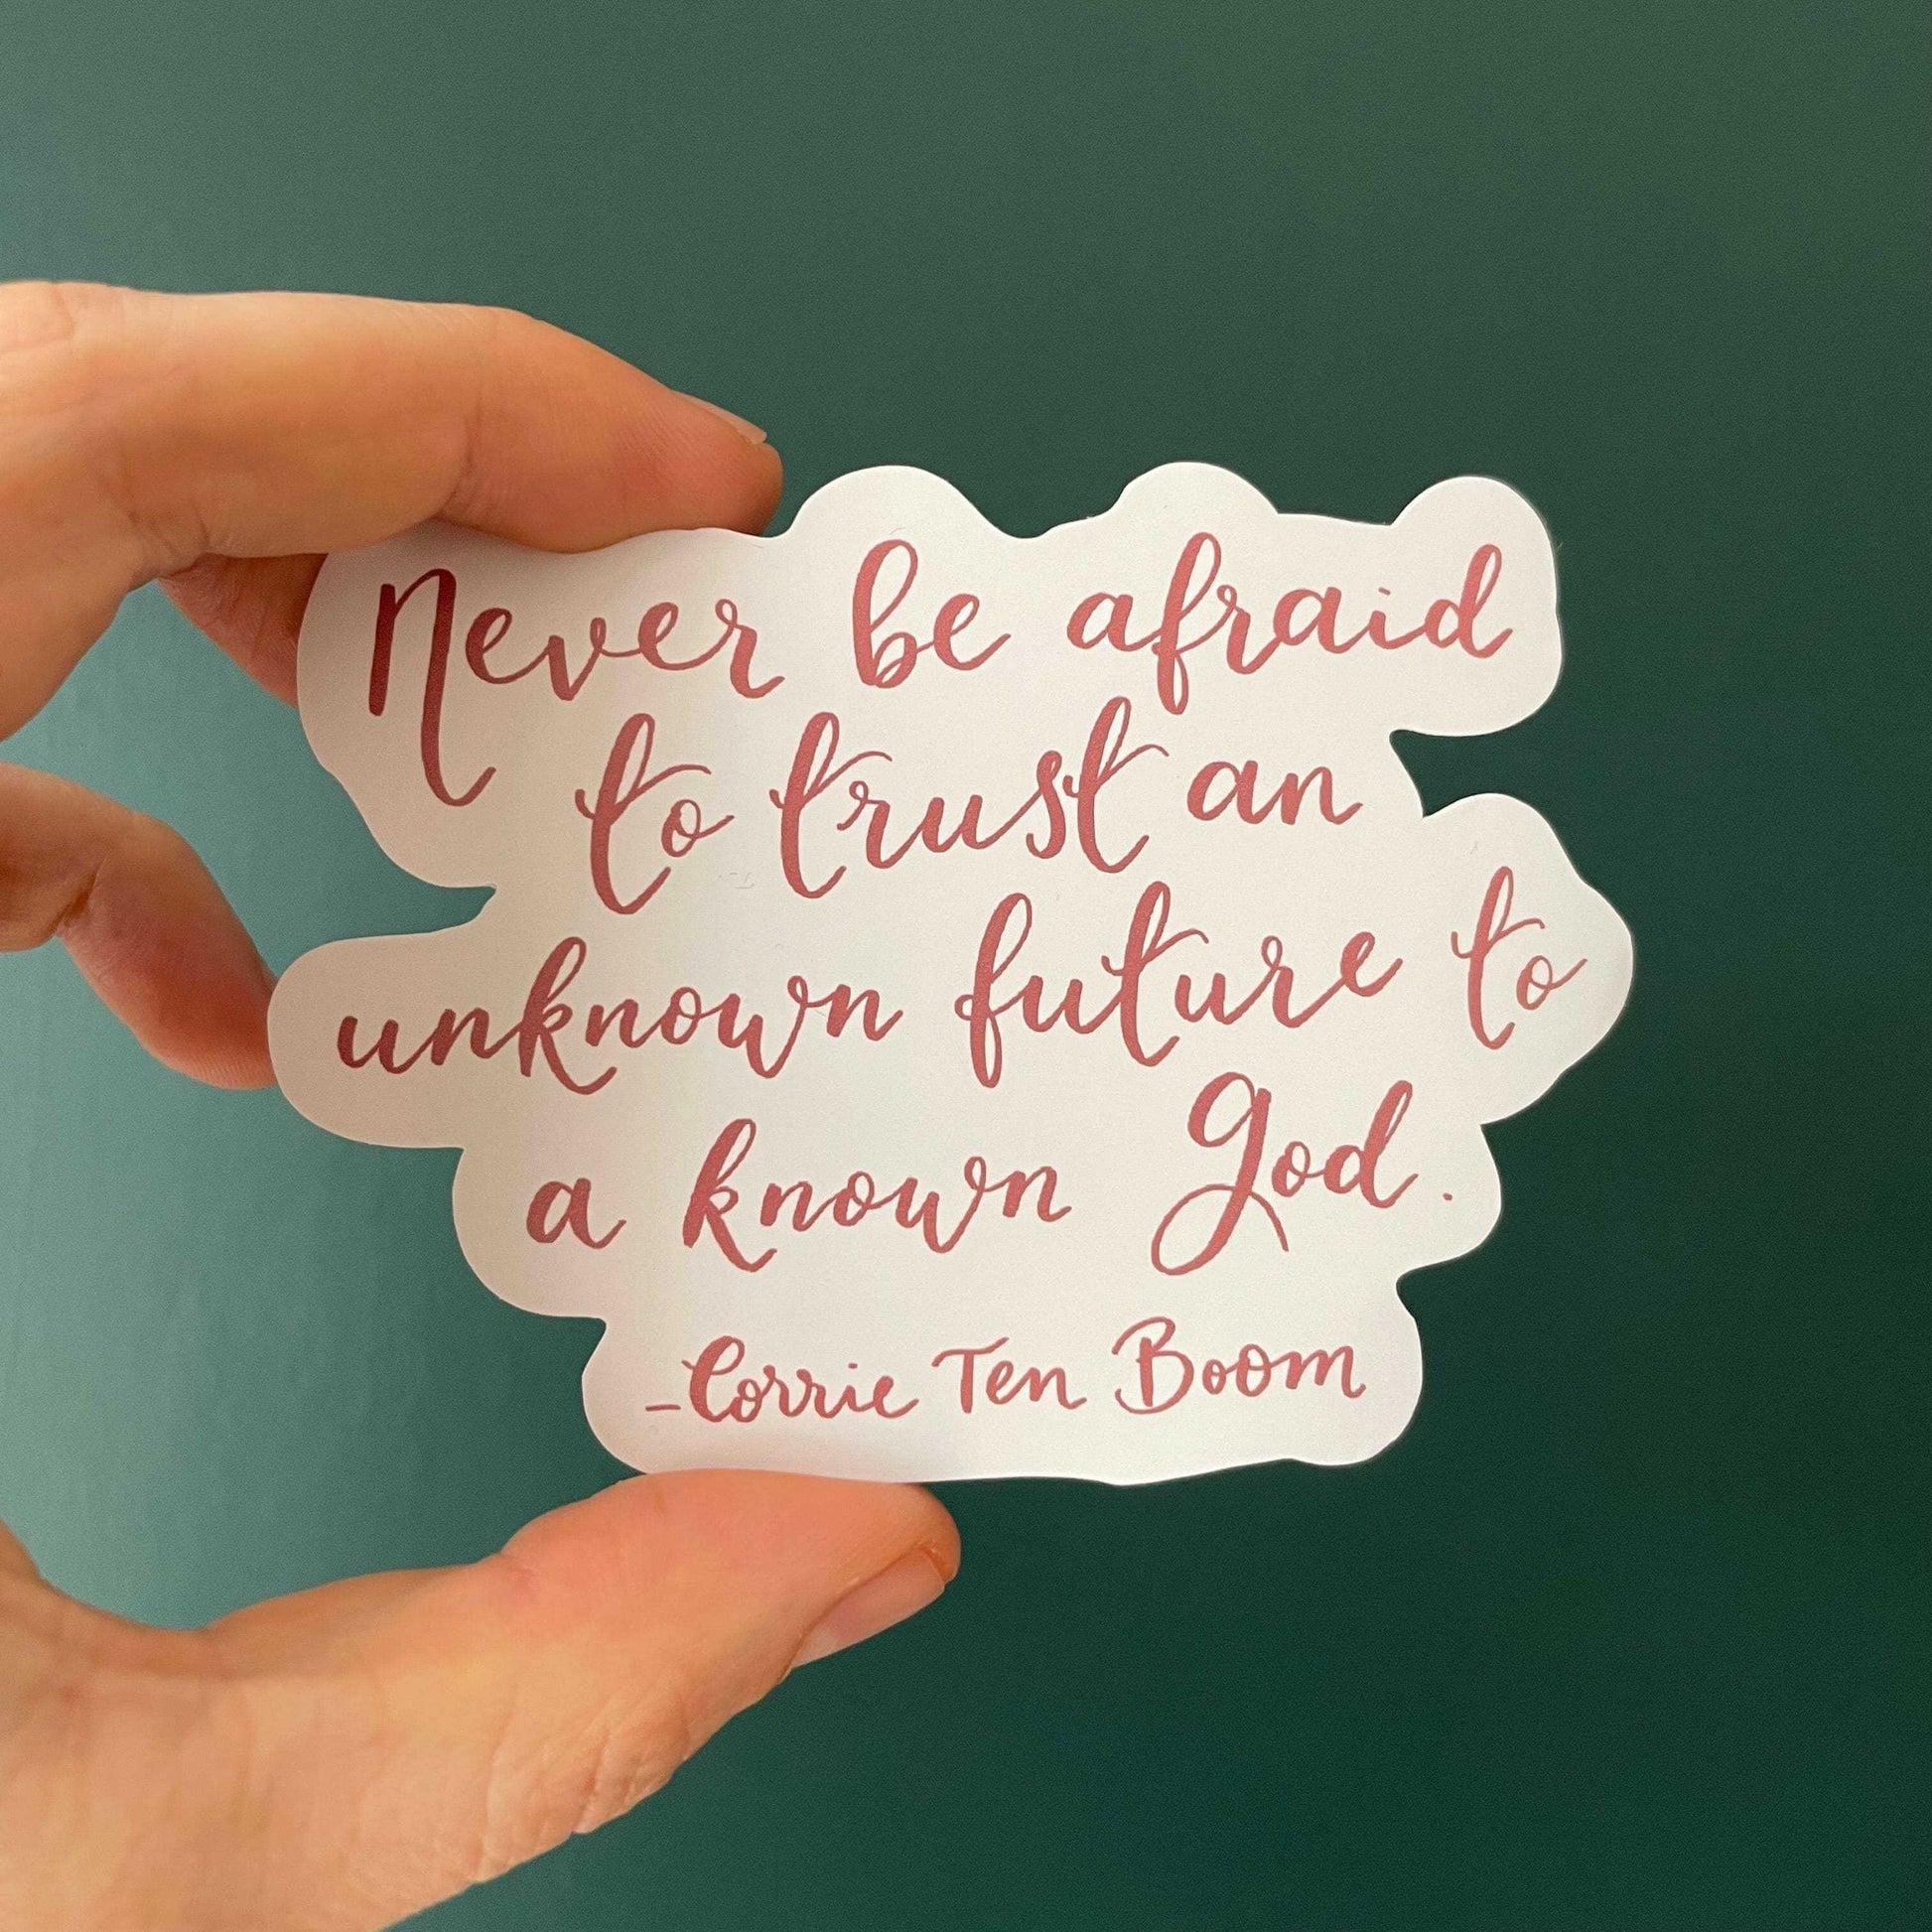 Christian sticker, Corrie Ten Boom quote And Hope Designs stickers